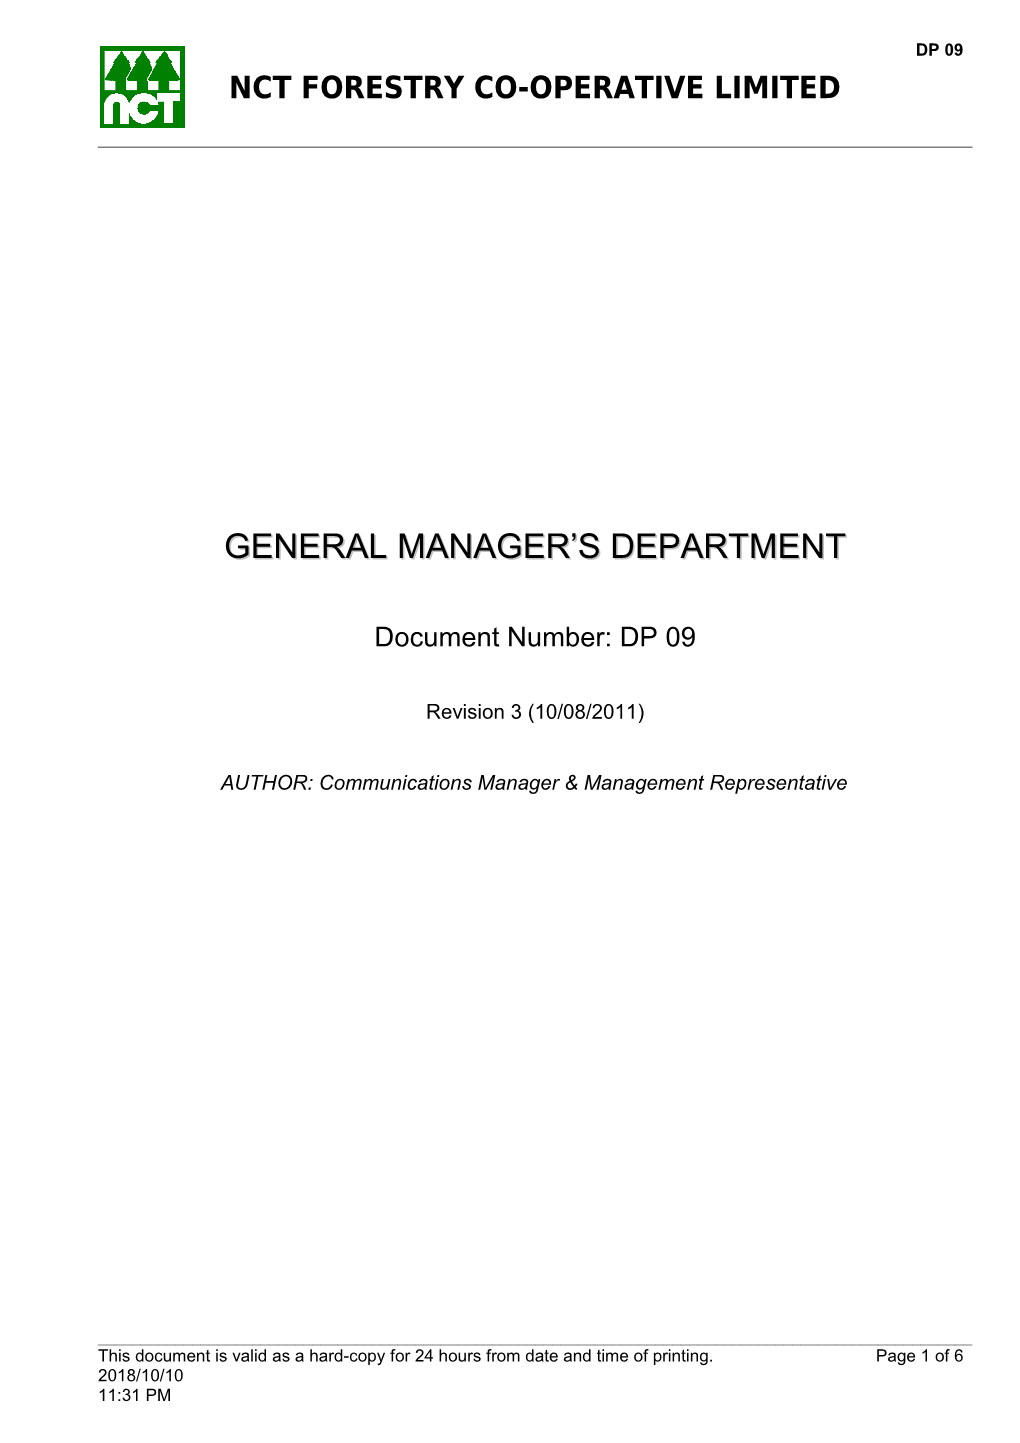 Management of Quality Systems Documents